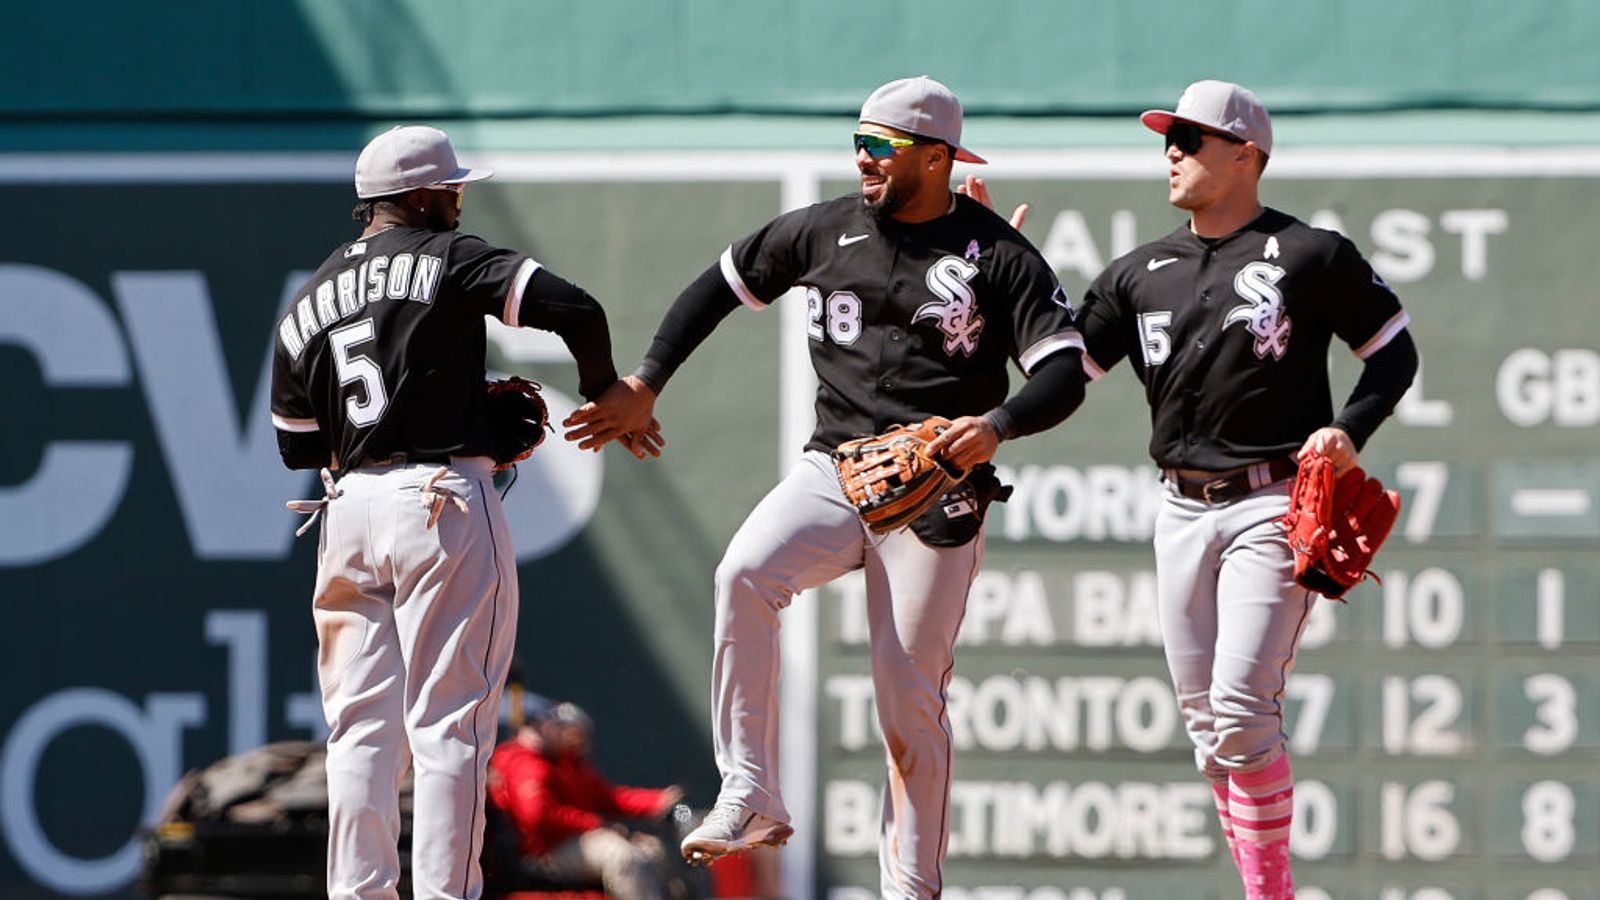 BSJ Game Report: White Sox 5, Red Sox 4 - Late inning magic